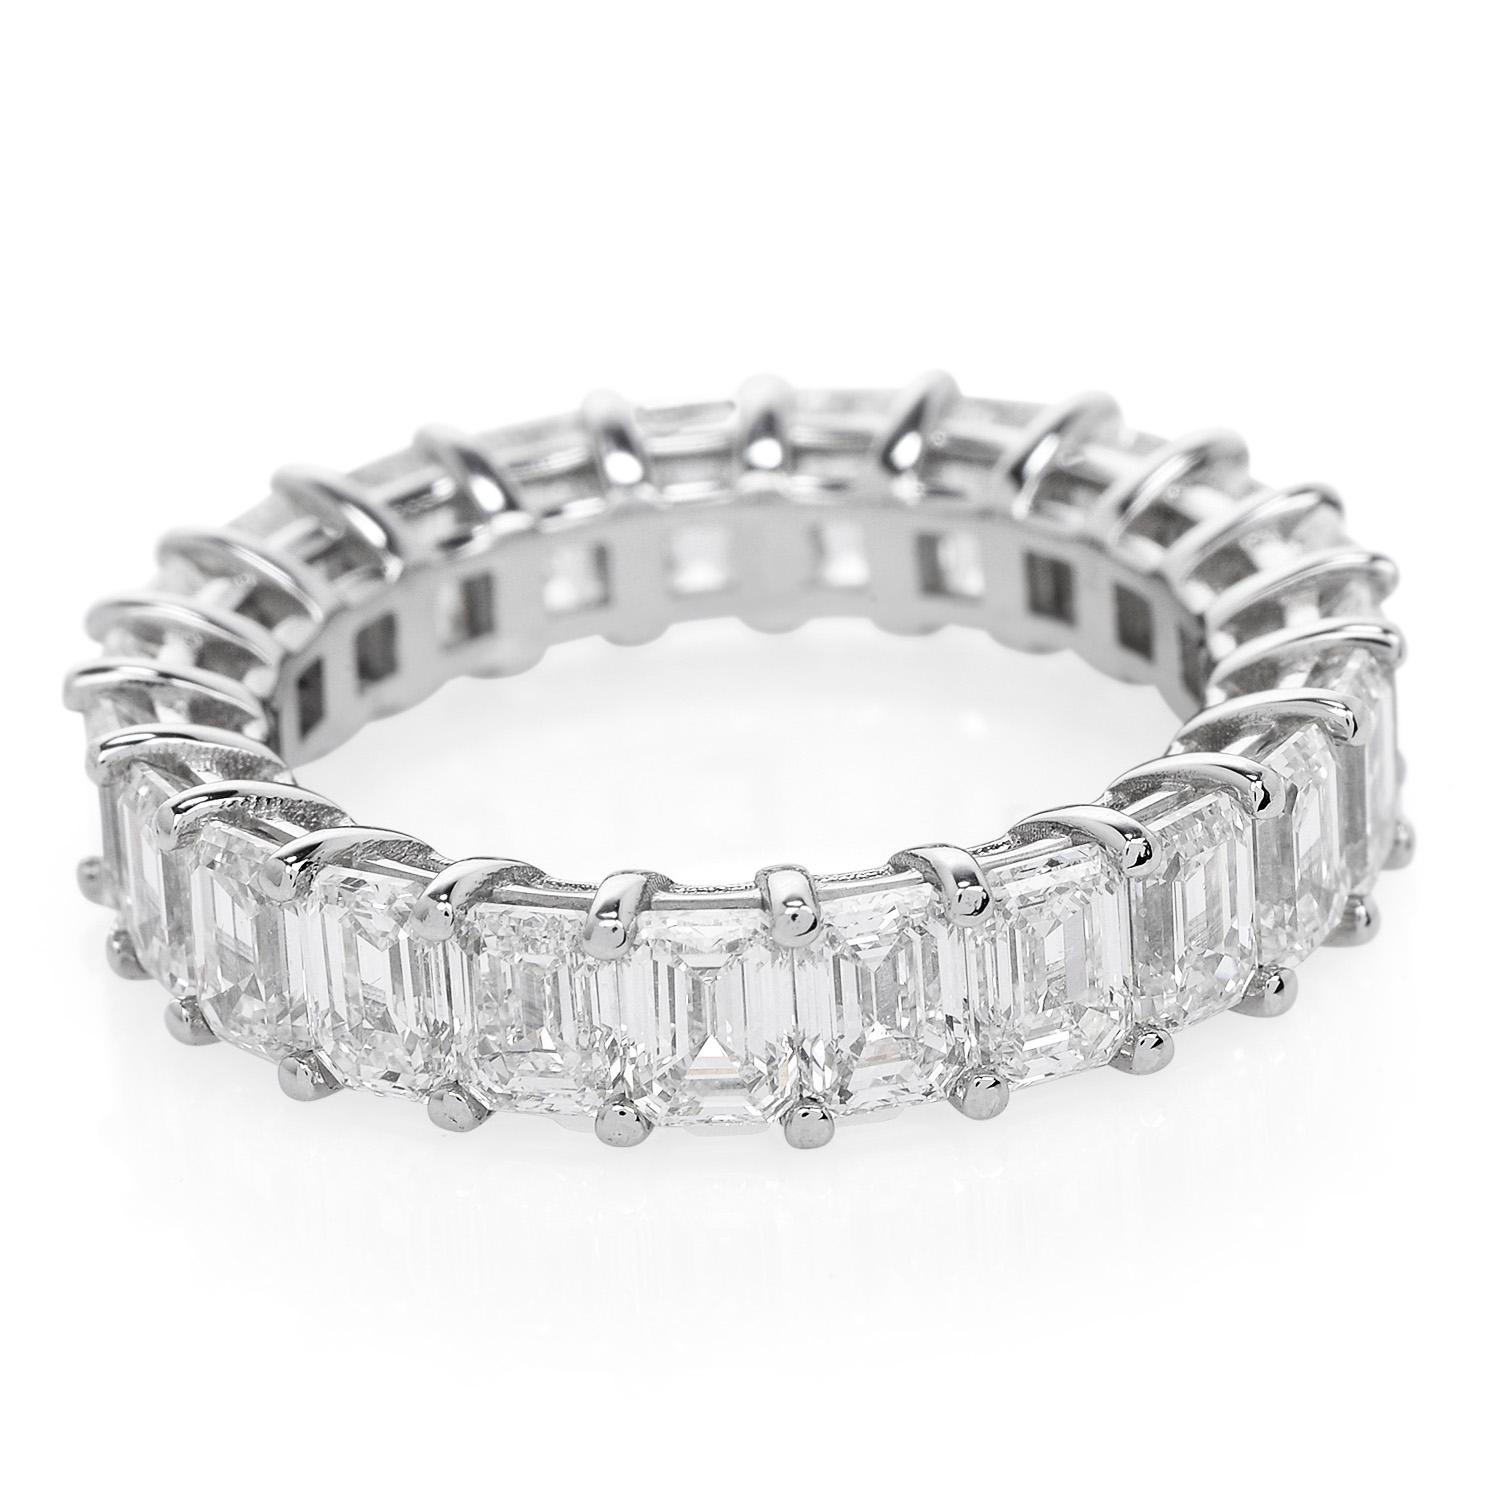 5.51 carats Emerald Cut Diamond Platinum Eternity Band Ring In New Condition For Sale In Miami, FL